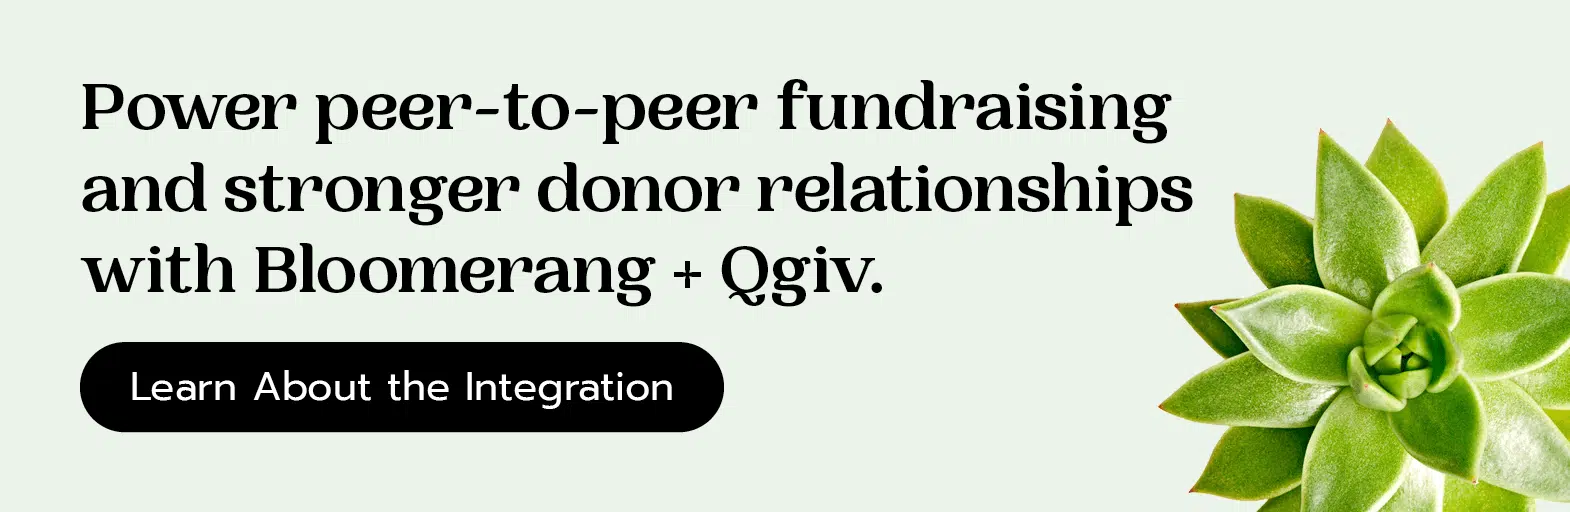 Power peer-to-peer fundraising and stronger donor relationships with Bloomerang + Qgiv. Learn about the integration here.